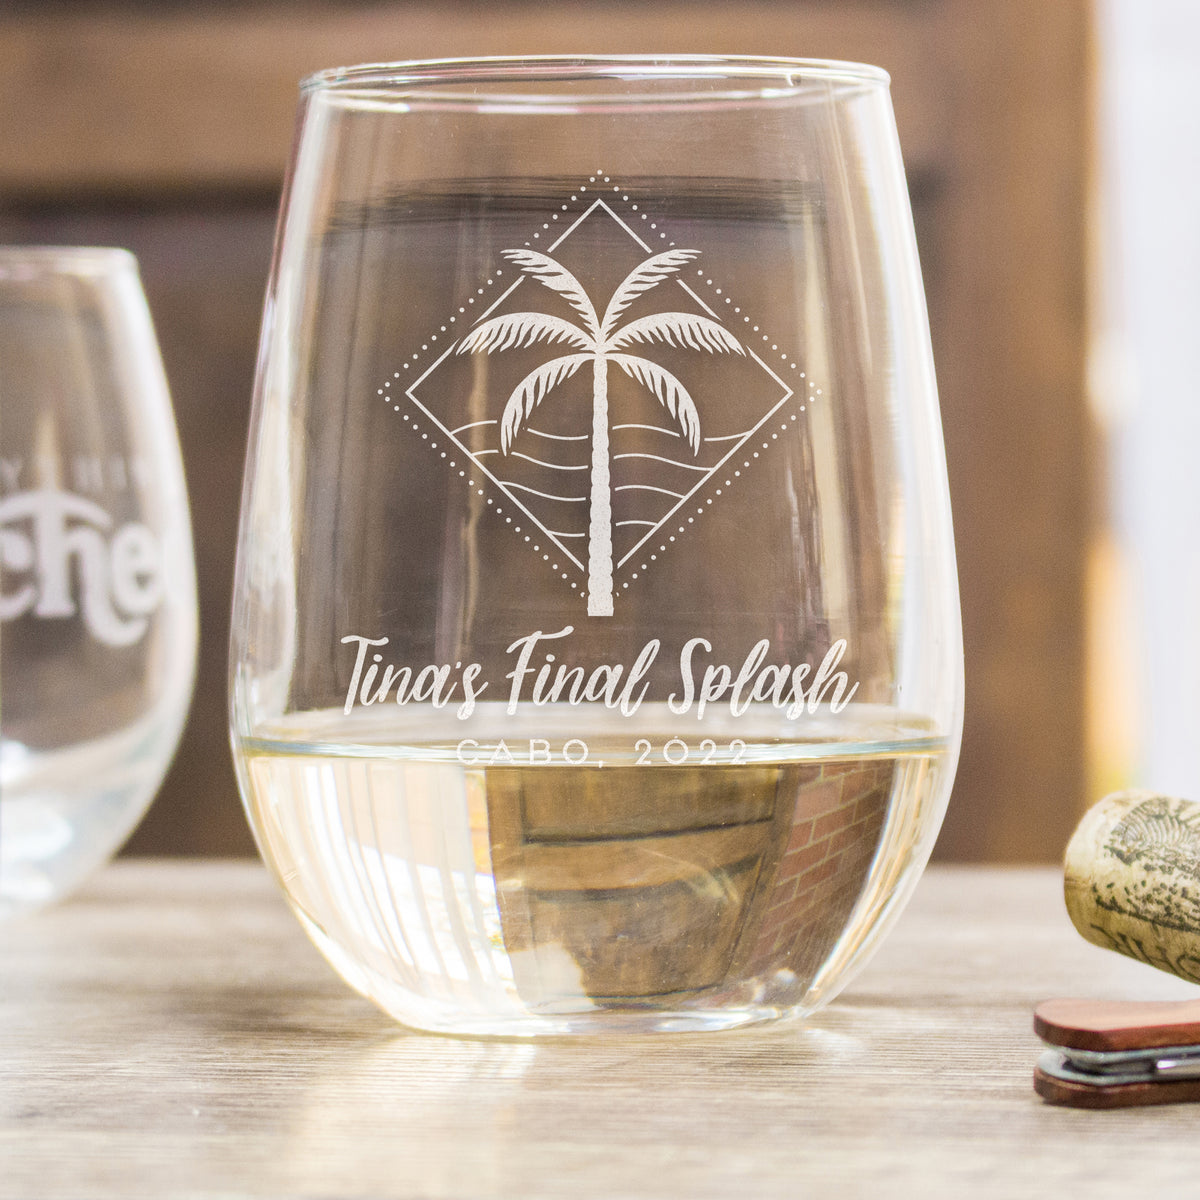 Personalized White Wine Monogrammed Glasses